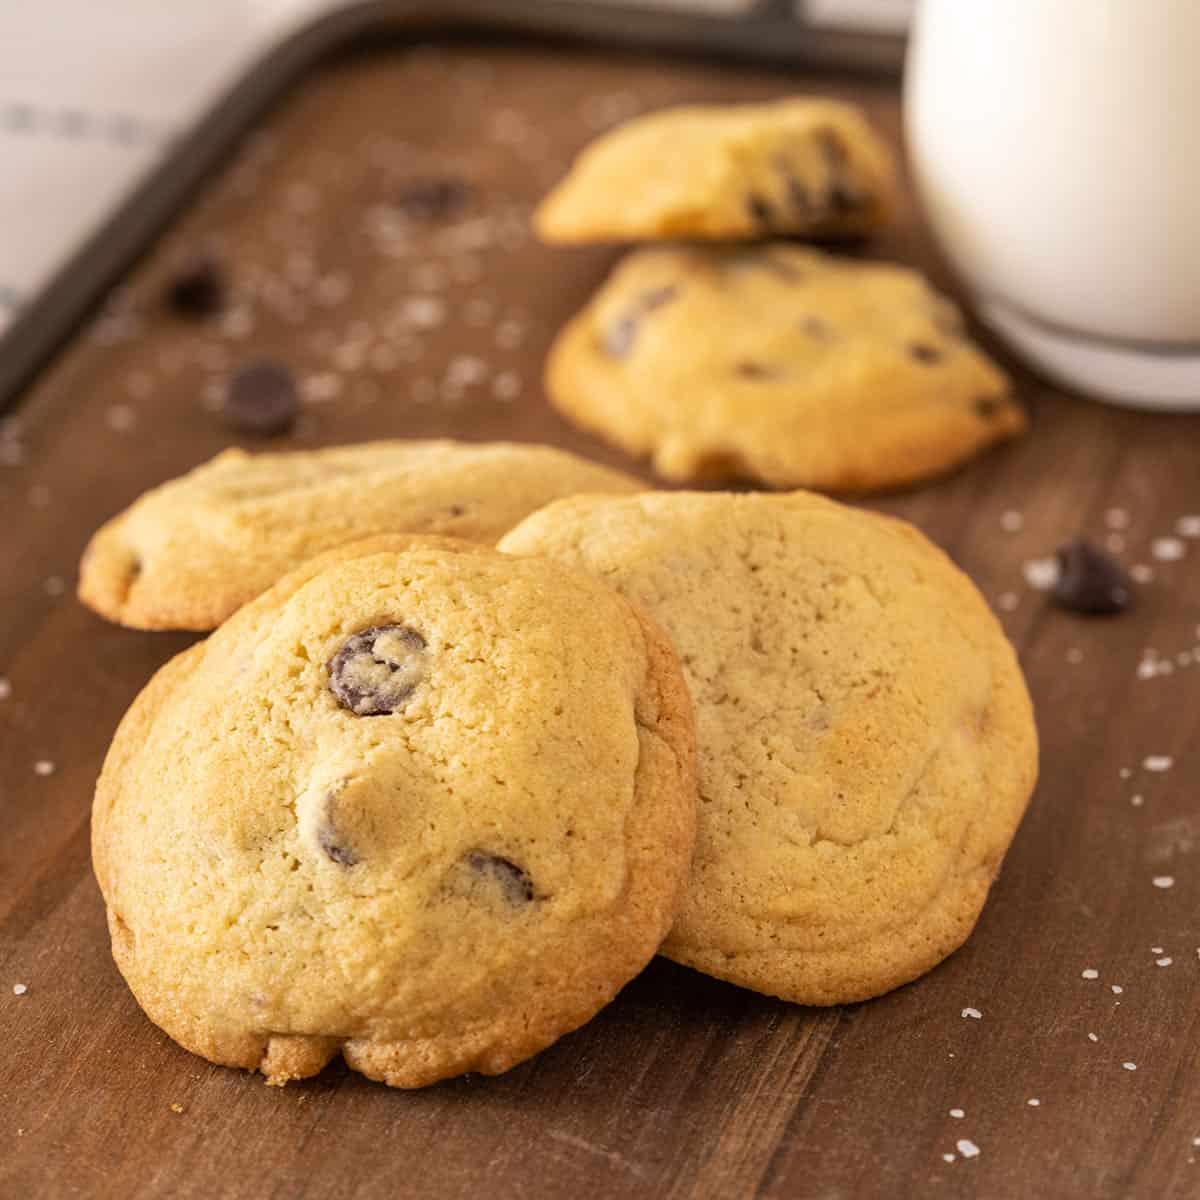 Chocolate chip cookies on a serving board with a glass of milk.